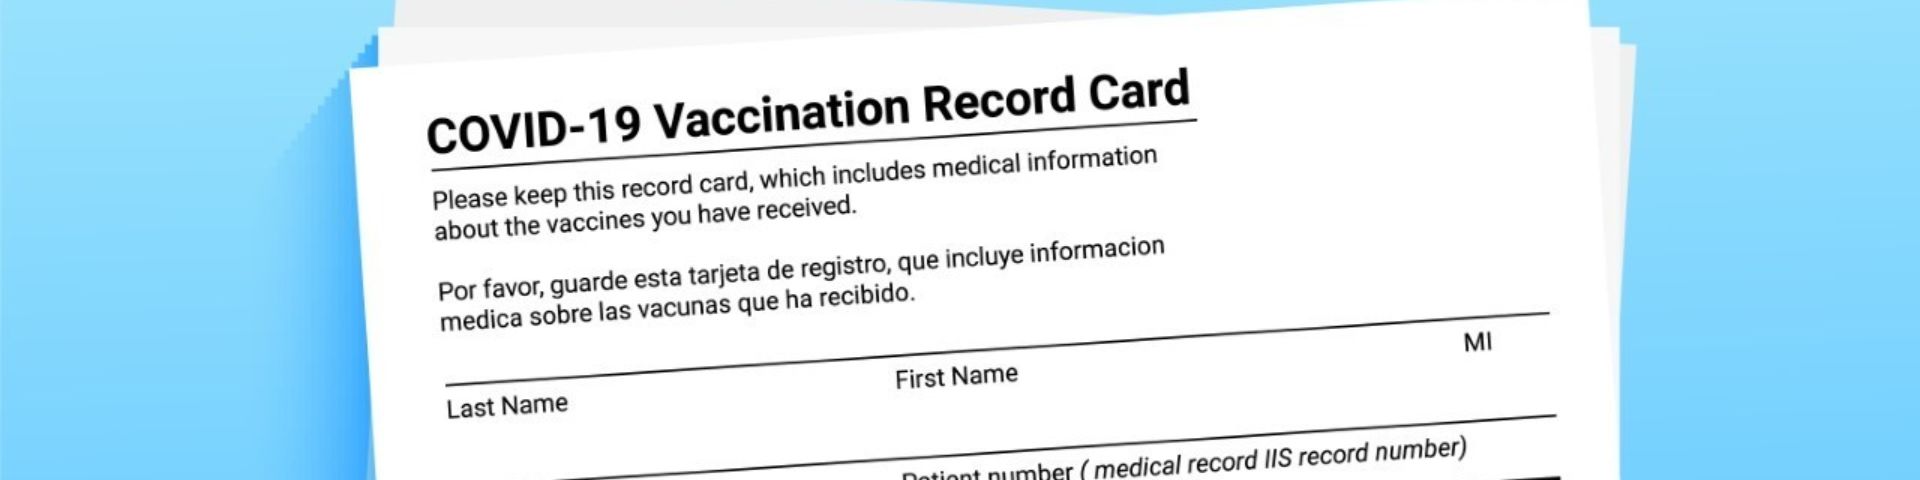 Vaccination cards